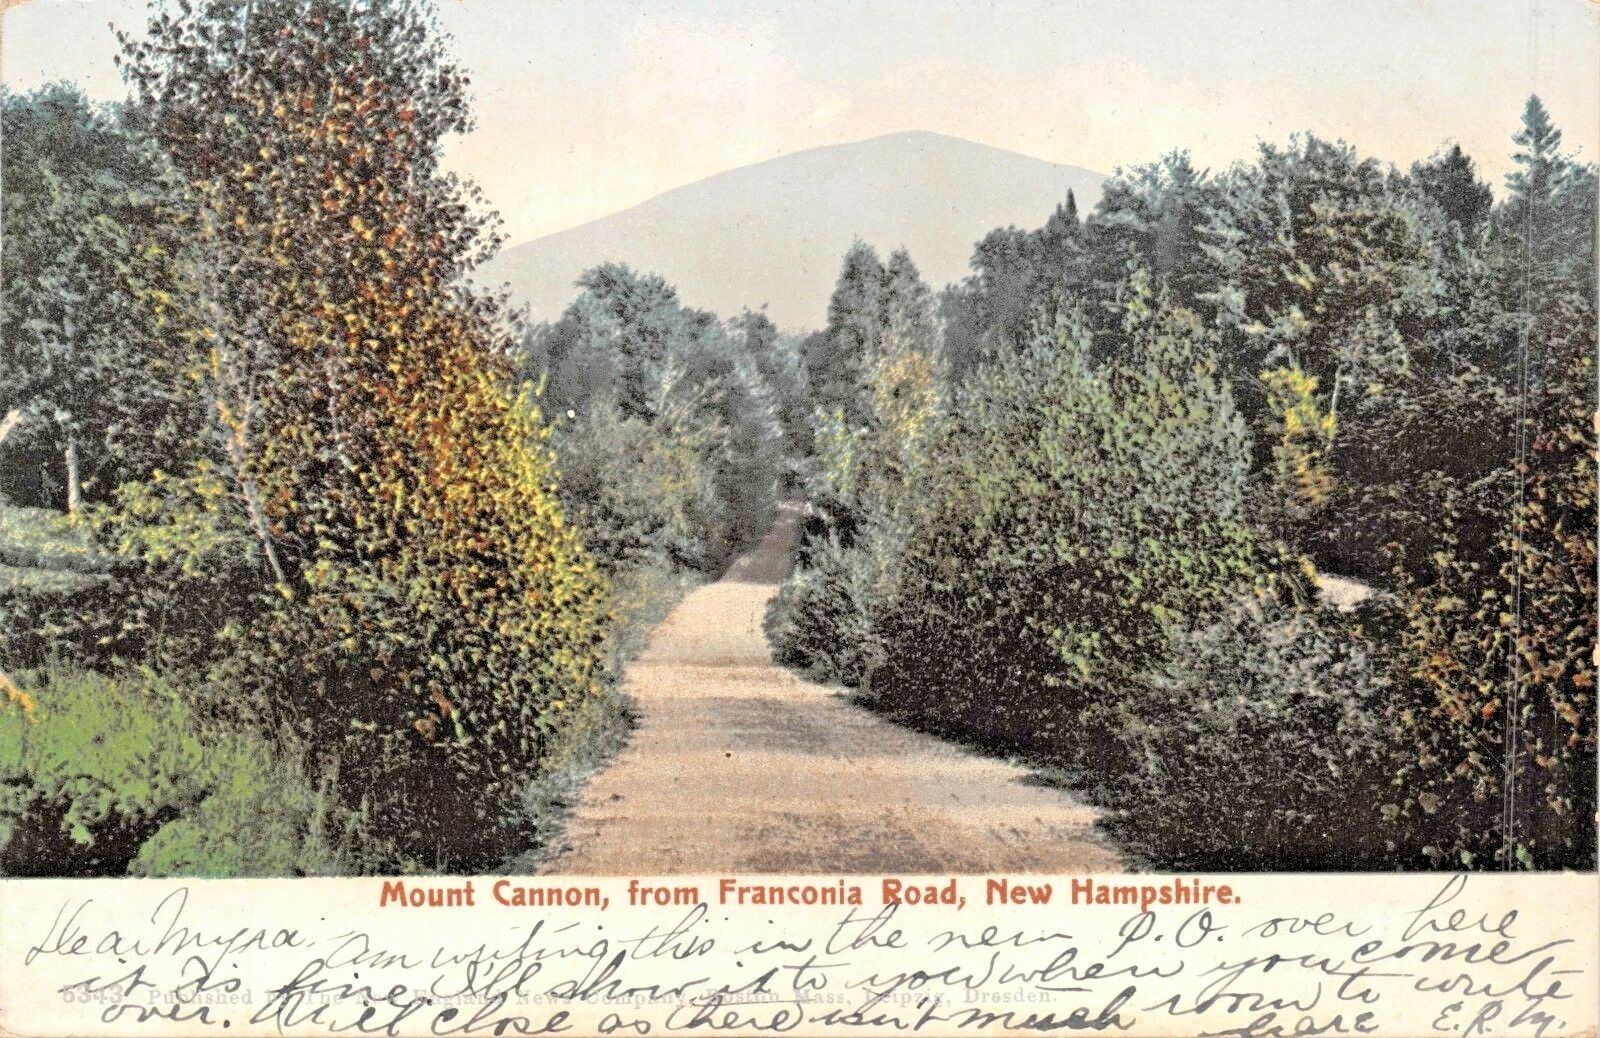 MOUNT CANNON NEW HAMPSHIRE FROM FRANCONIA ROAD-PHOTO POSTCARD 1905 PSMK - $8.67